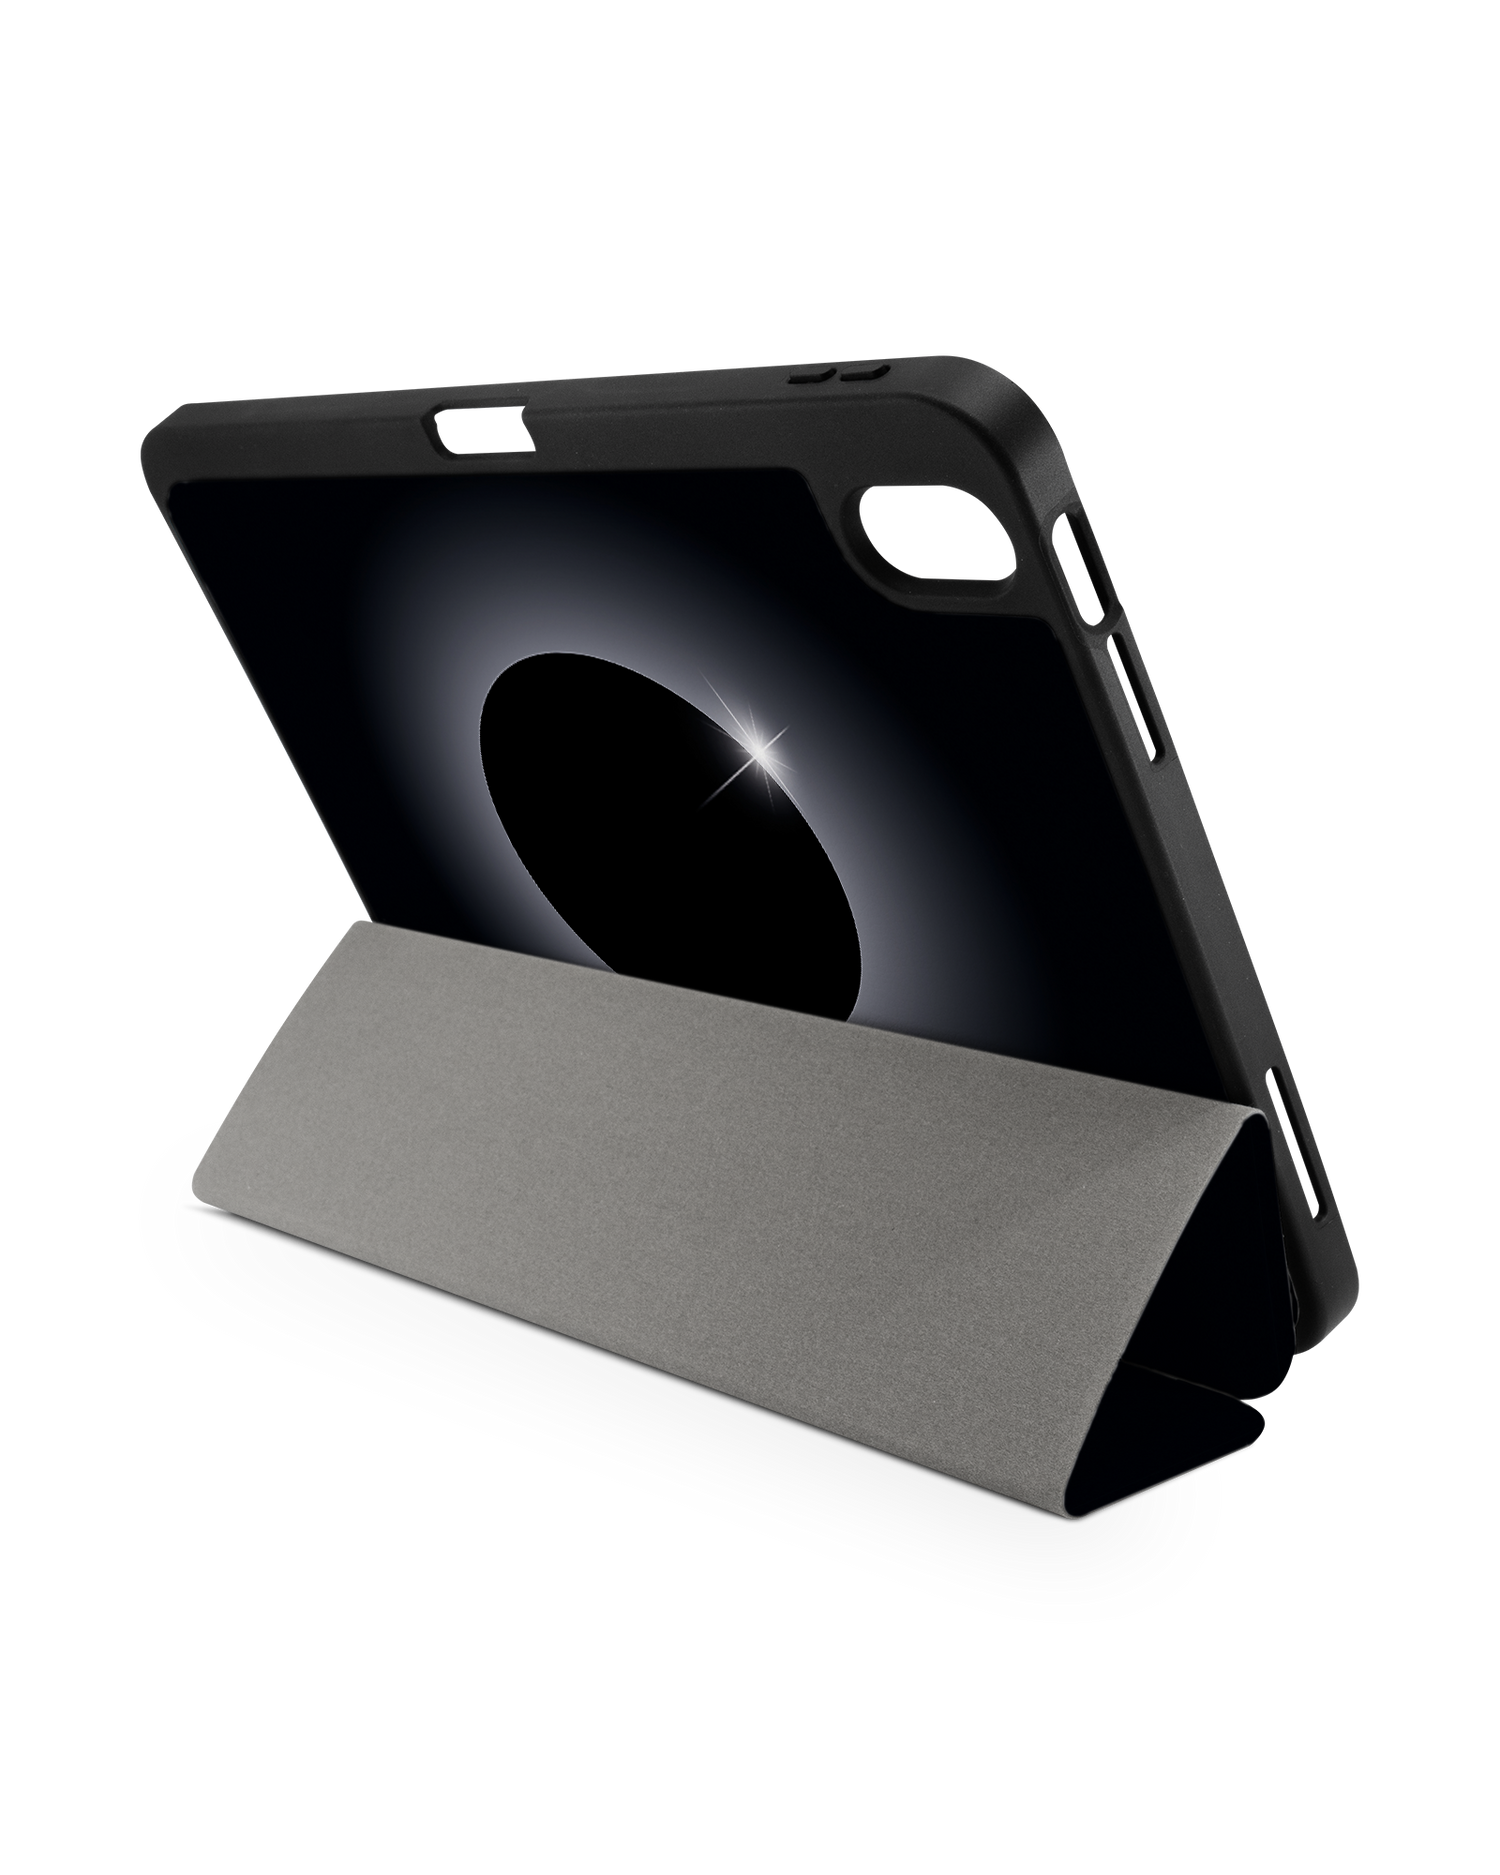 Eclipse iPad Case with Pencil Holder for Apple iPad (10th Generation): Set up in landscape format (back view)